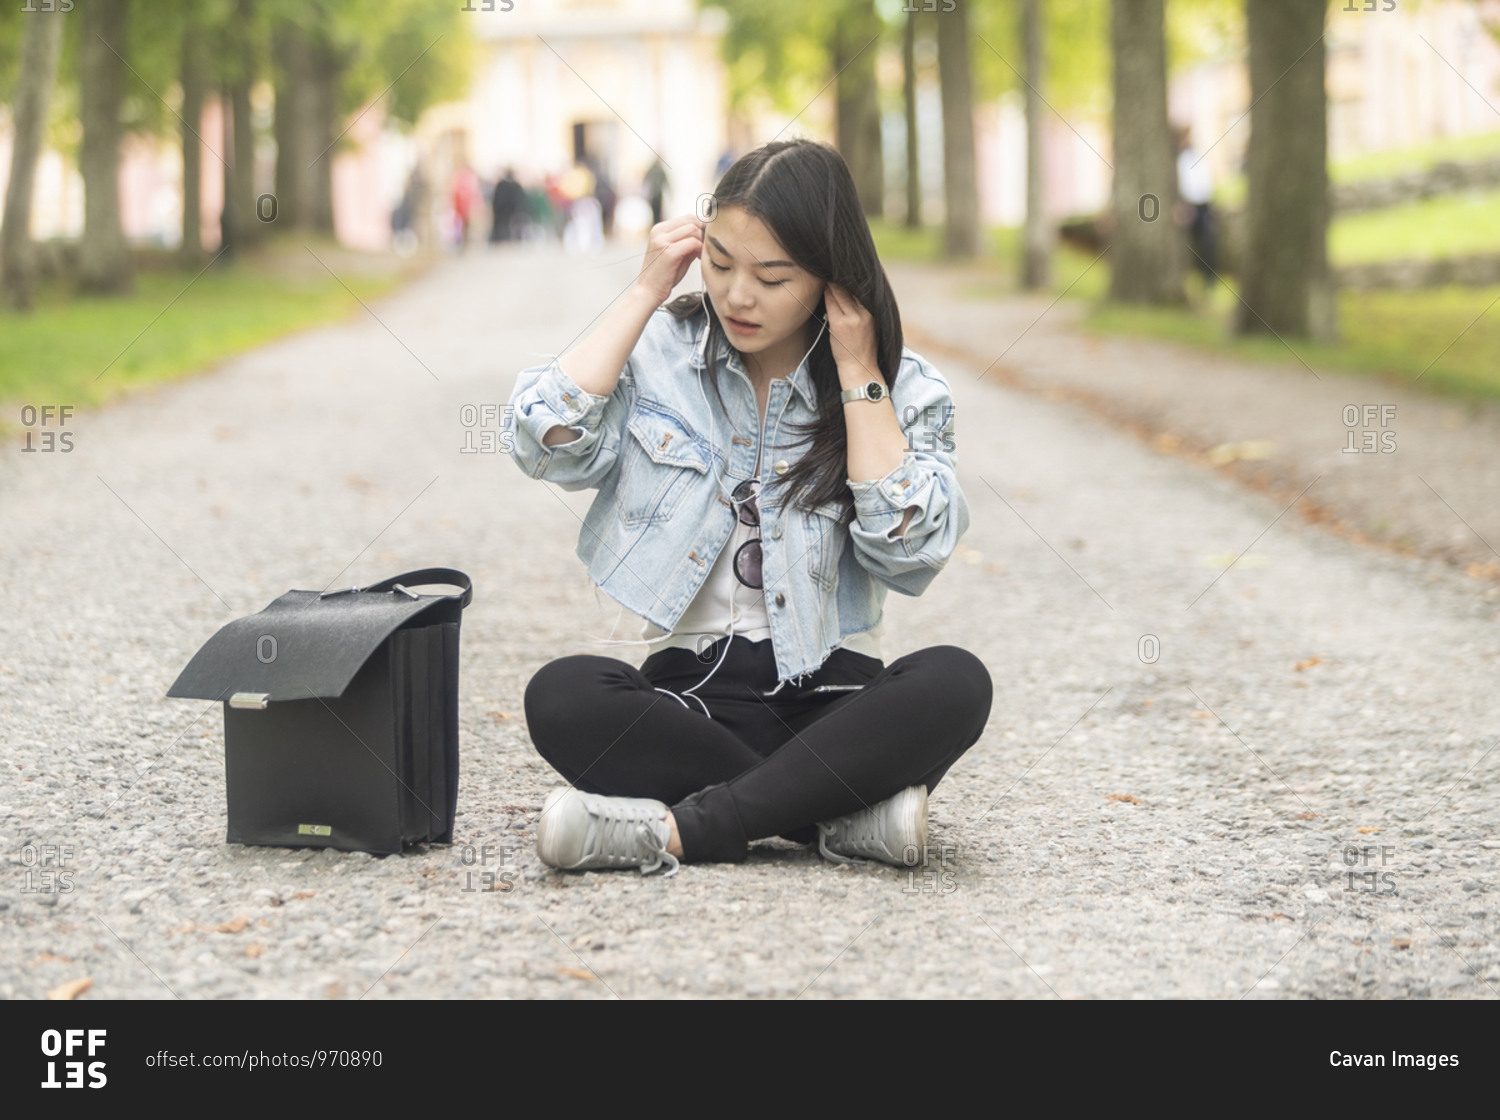 Asian female sitting on the ground and listening to music